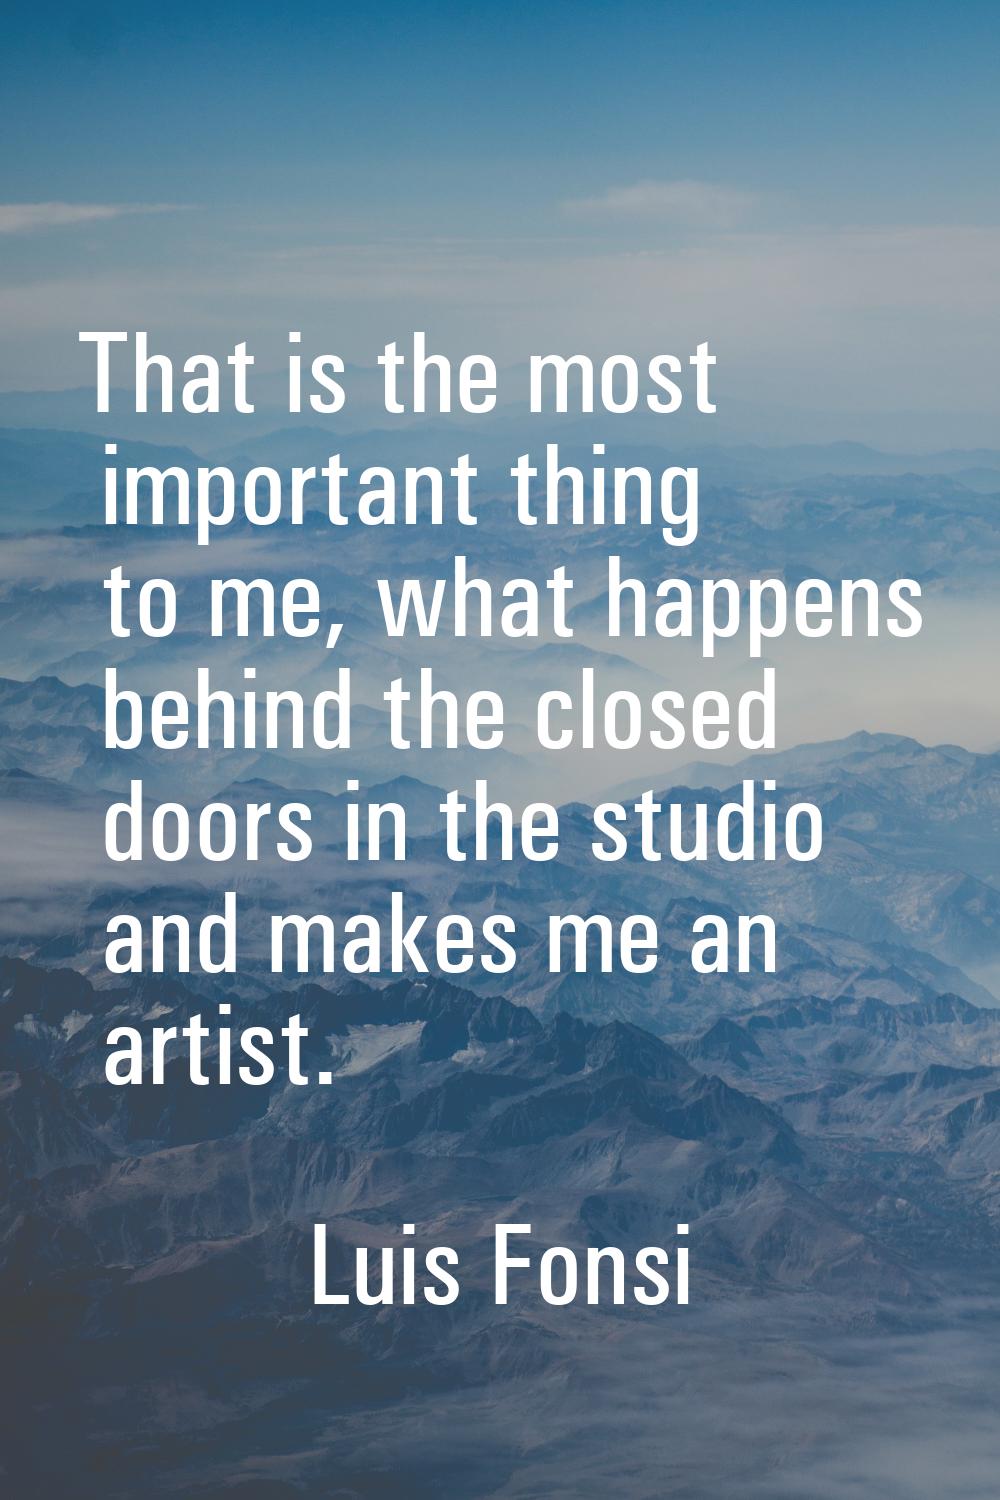 That is the most important thing to me, what happens behind the closed doors in the studio and make